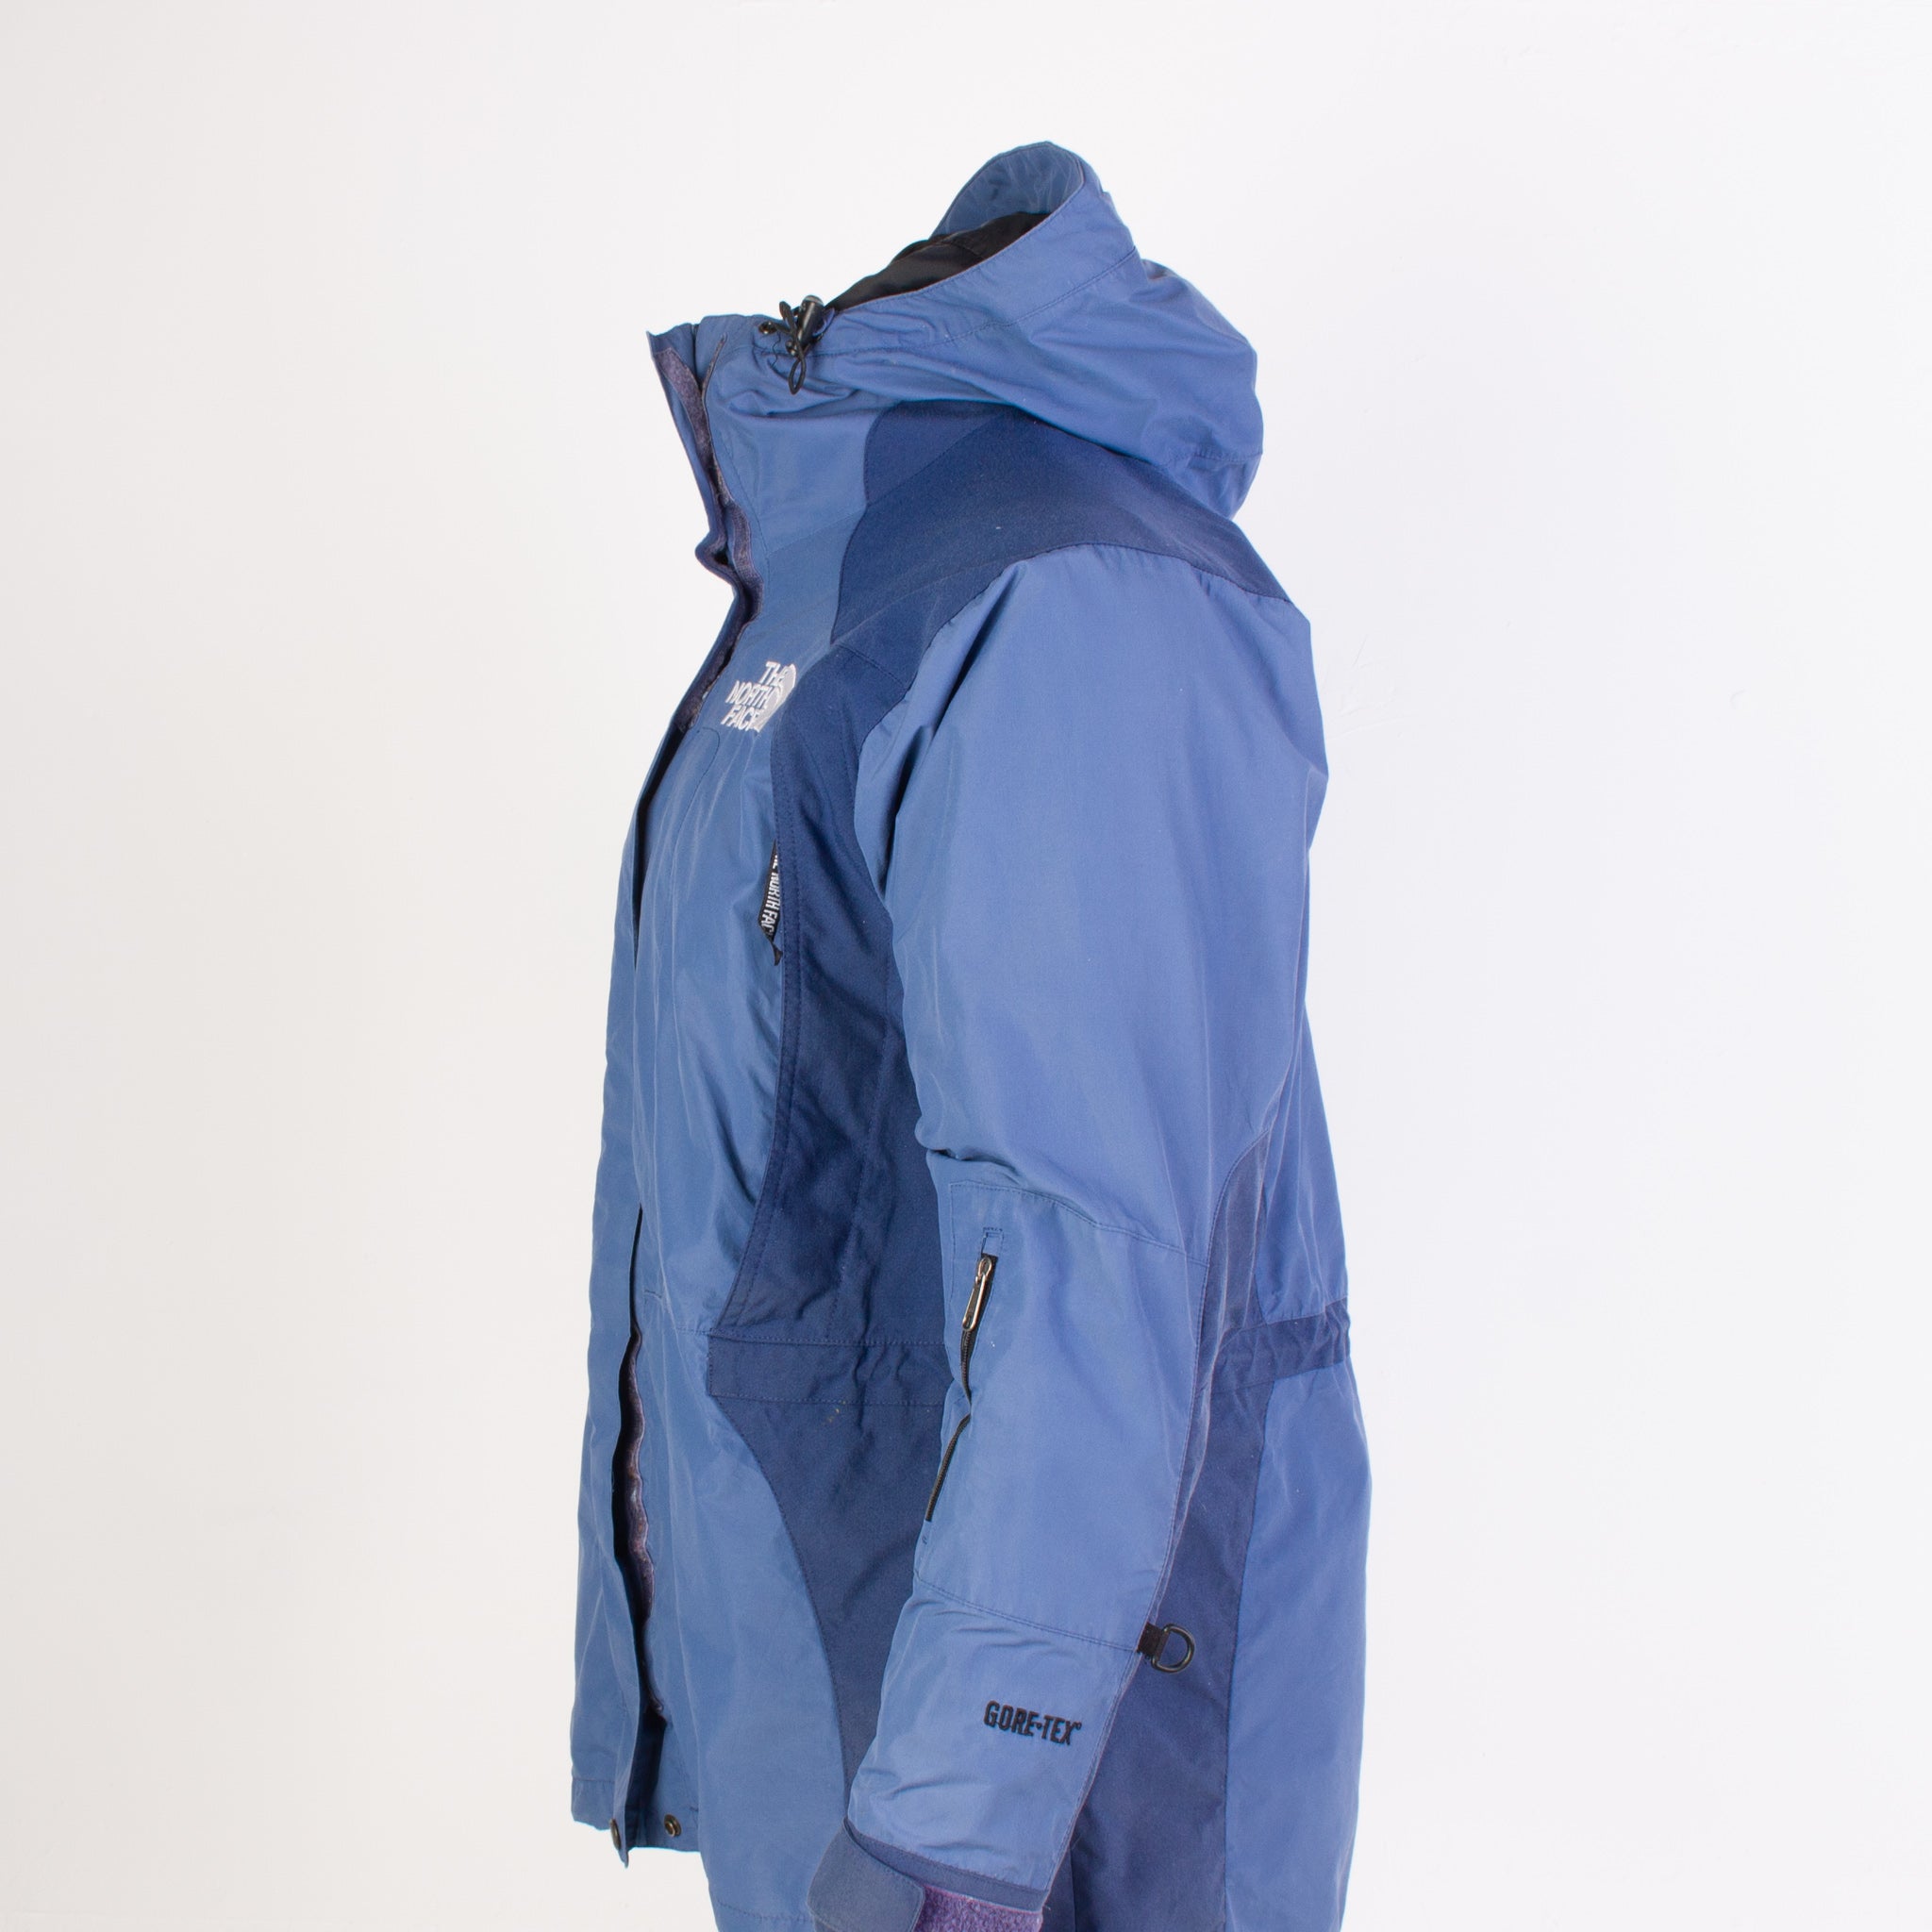 Vintage The North Face Gore Tex Jacket Blue American Madness